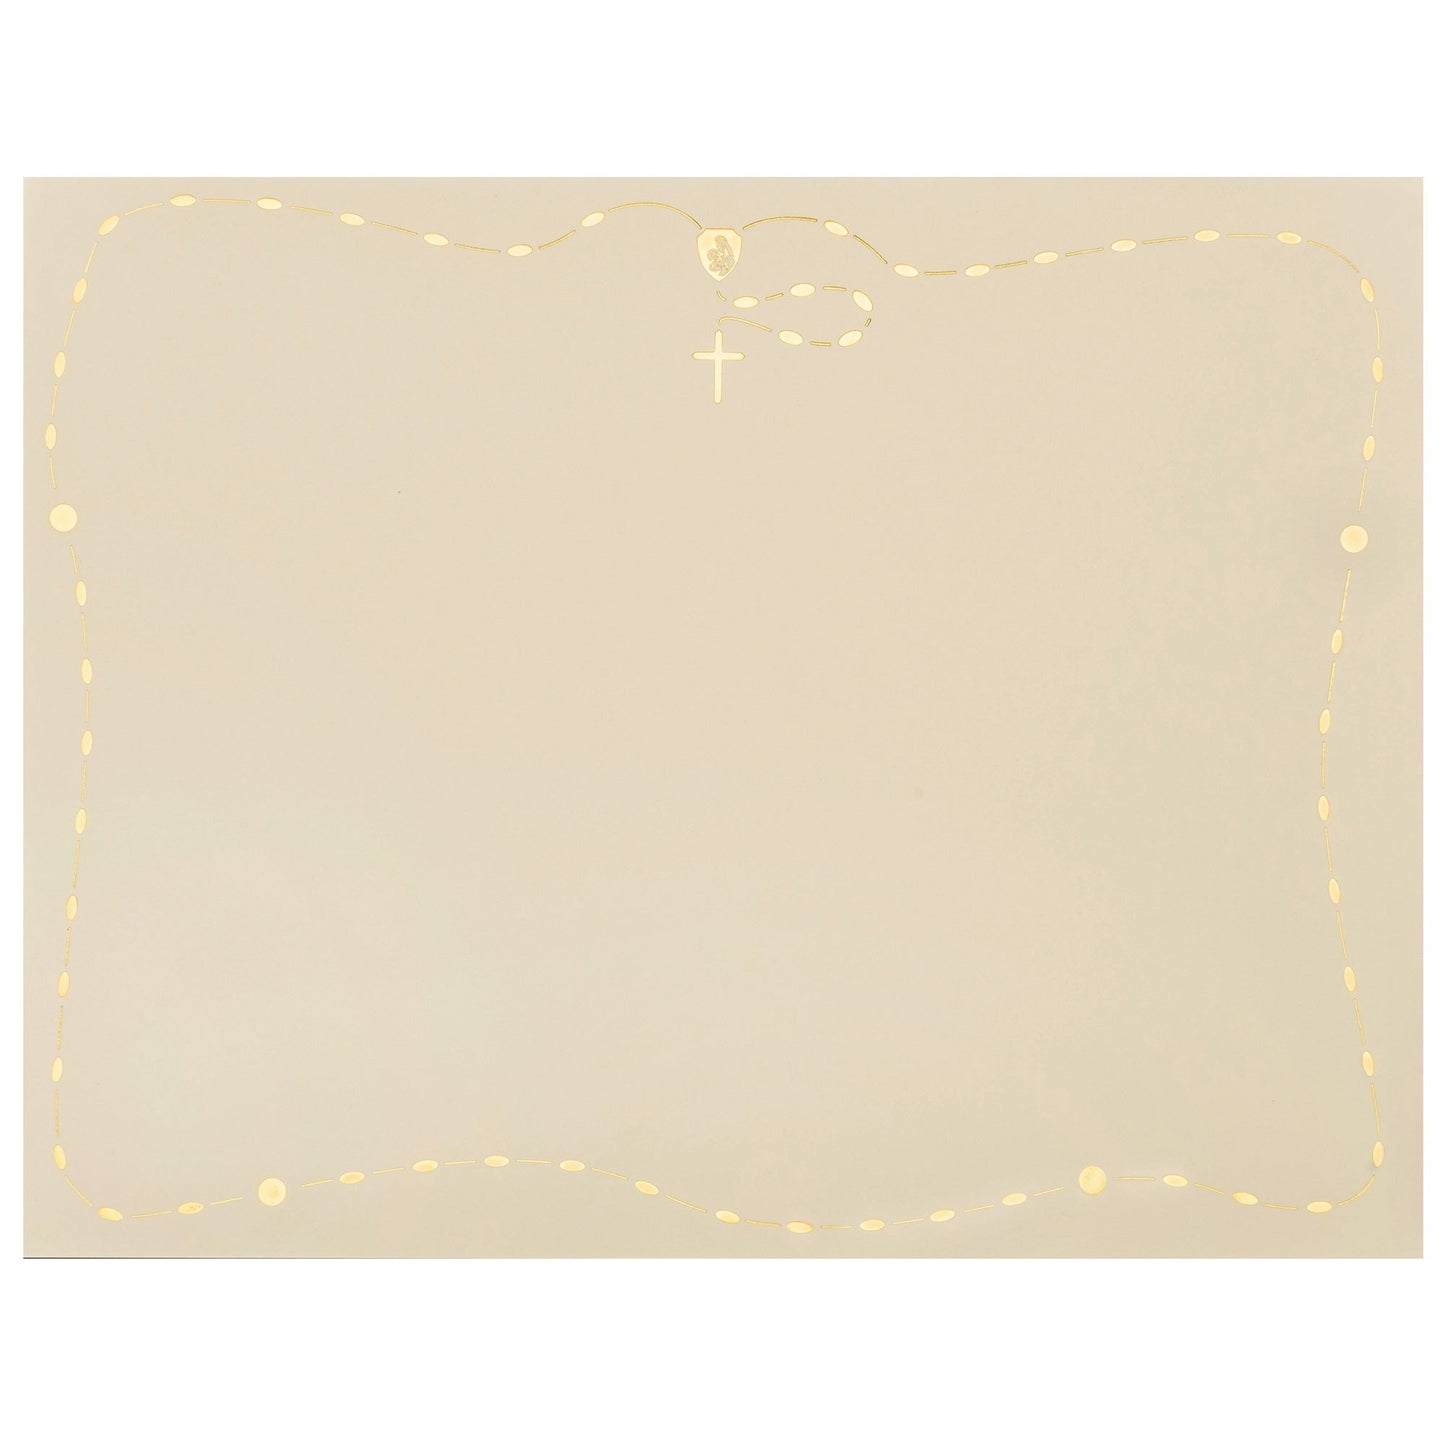 St. James® Religious Certificates with Holy Rosary Border, Gold Foil Engraved Design on 65lb Ivory Card, Pack of 50